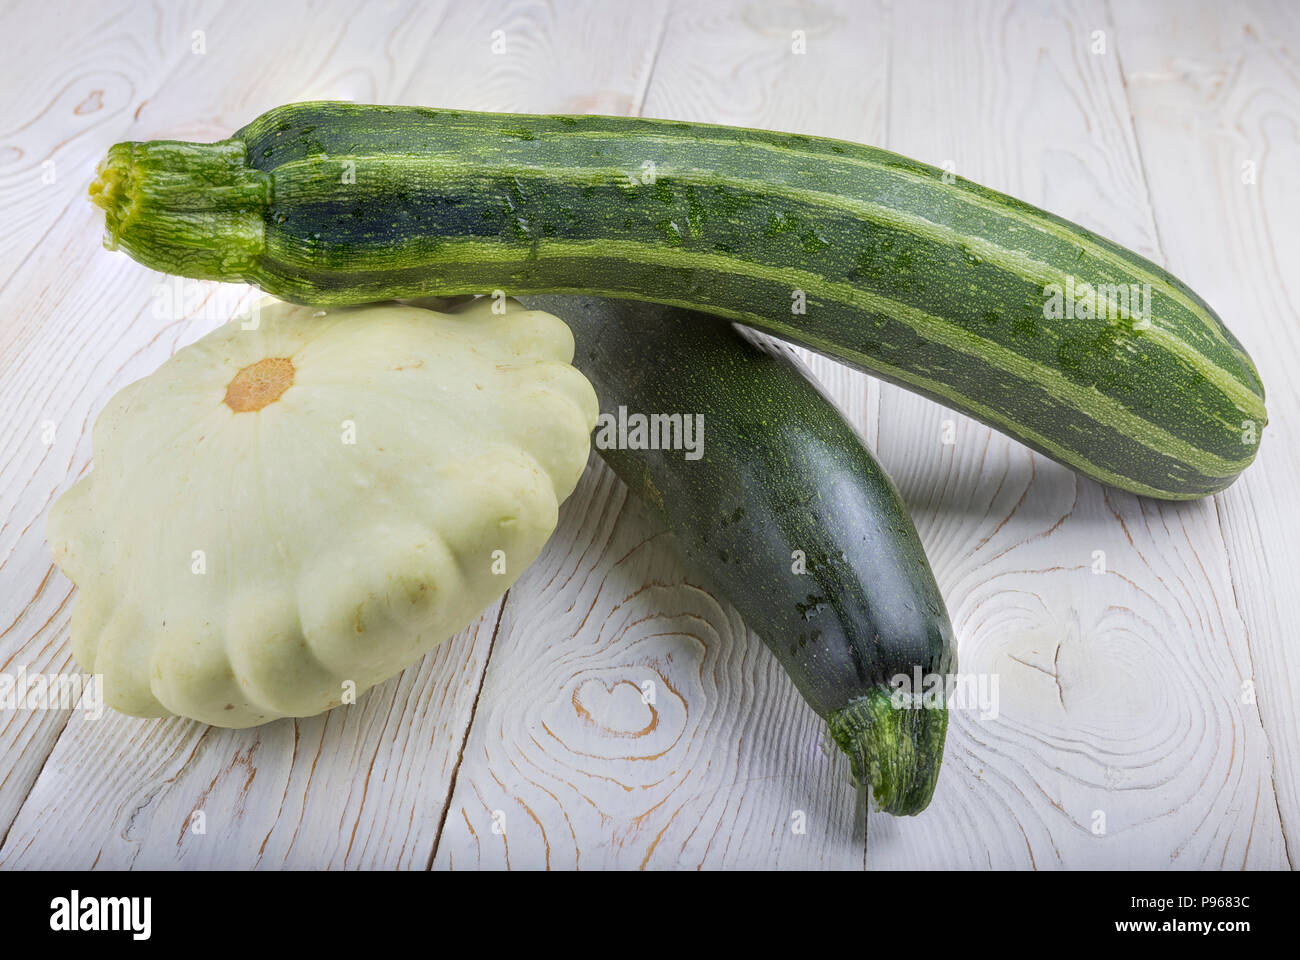 Patisson and zucchini on a wooden table. Stock Photo